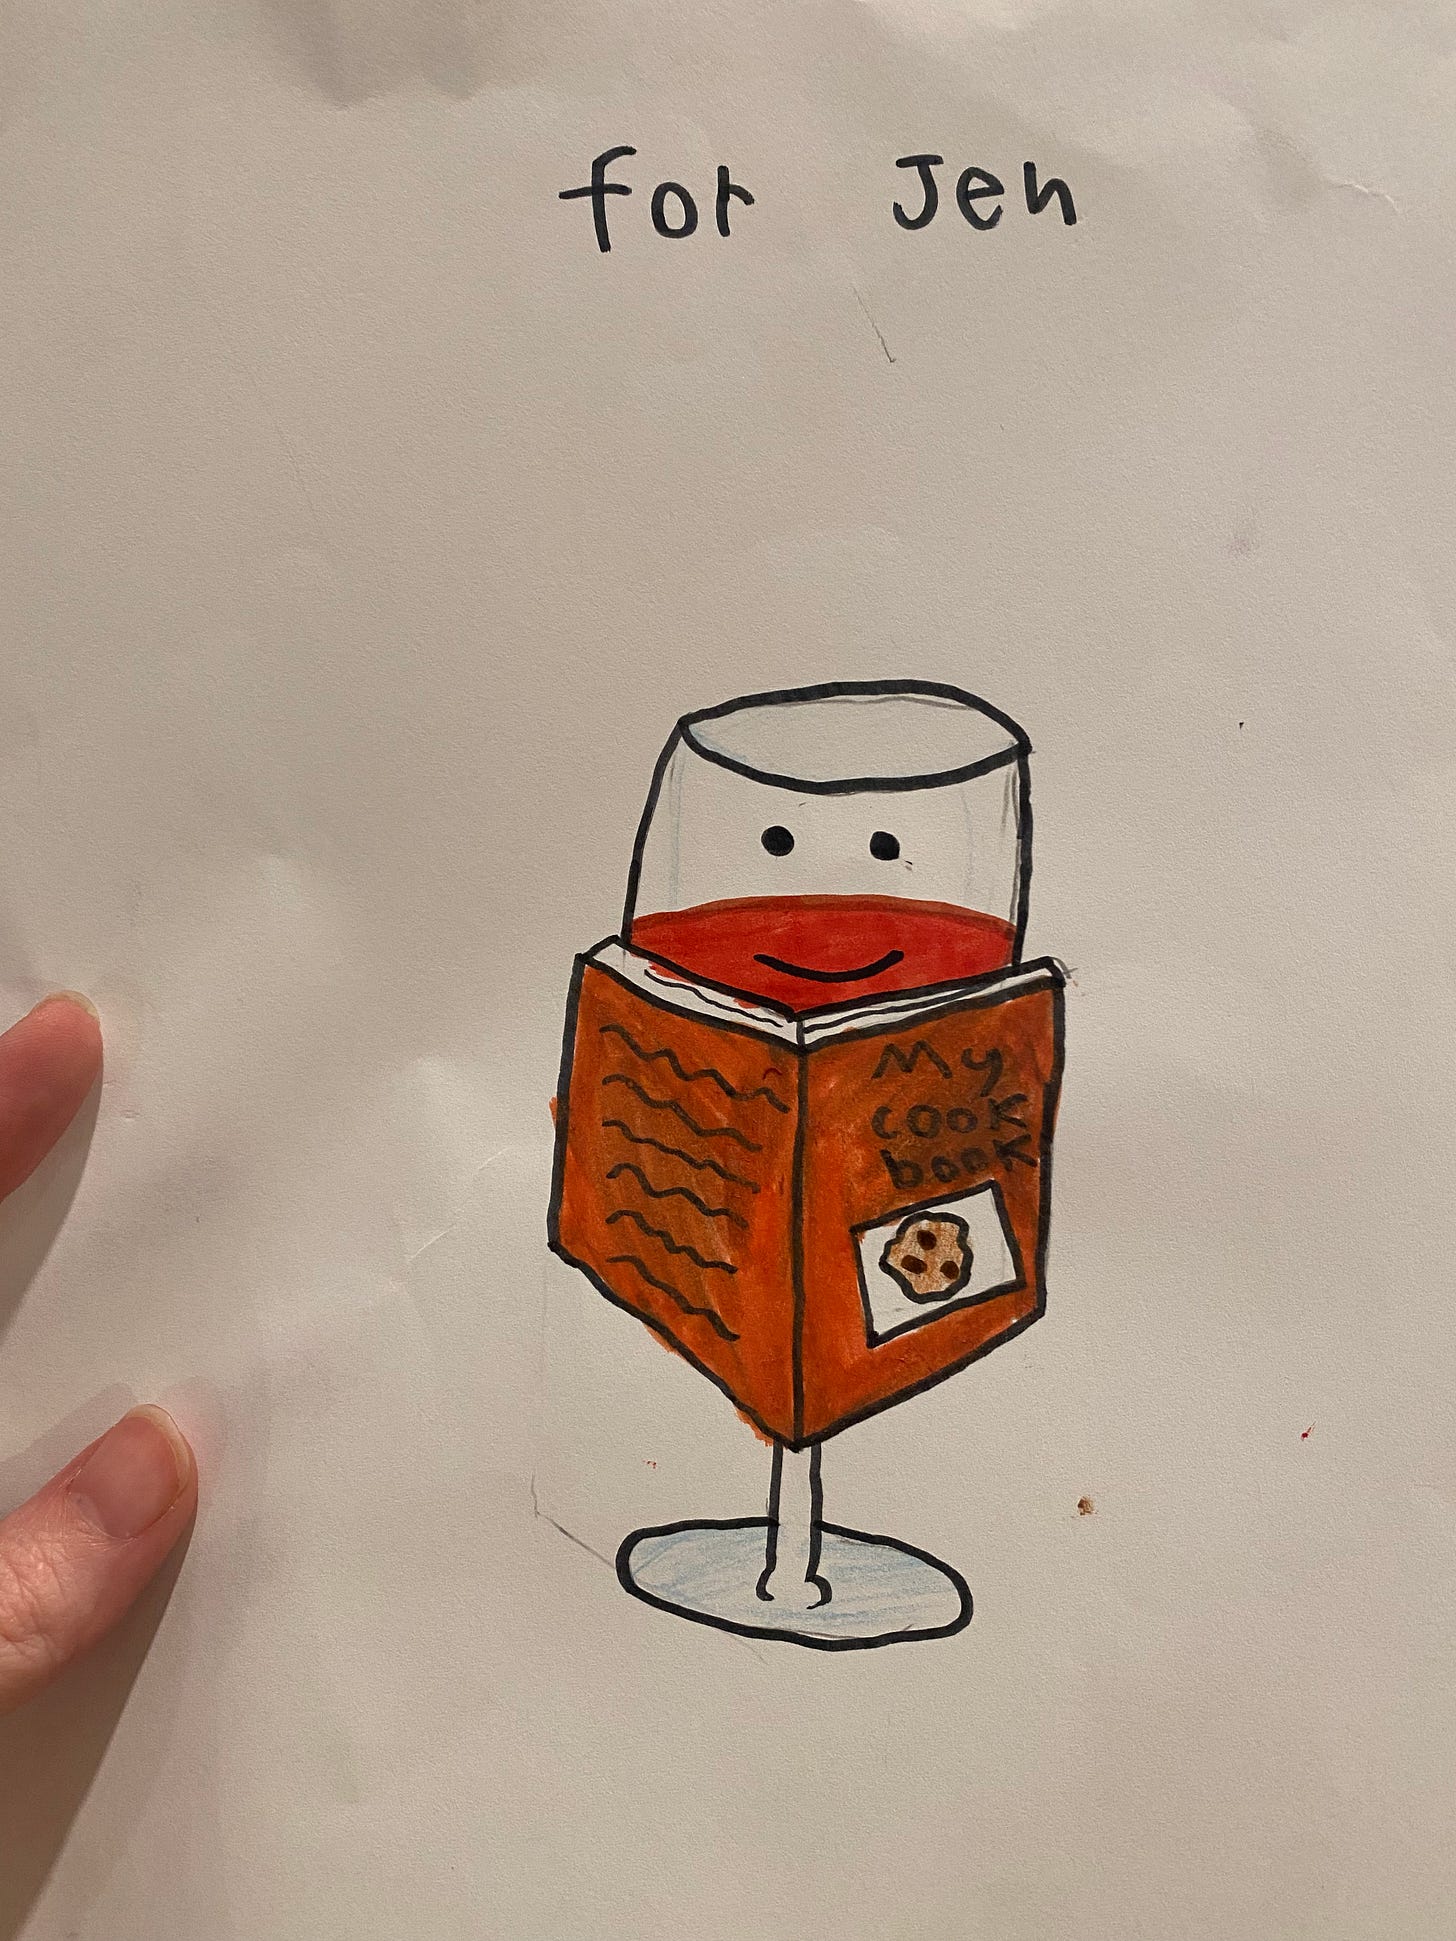 A drawing done by an older child, a glass of red wine with a smiley face, in front of a book that says 'my cookbook' on the cover. text at the top of the page reads 'for Jen'.